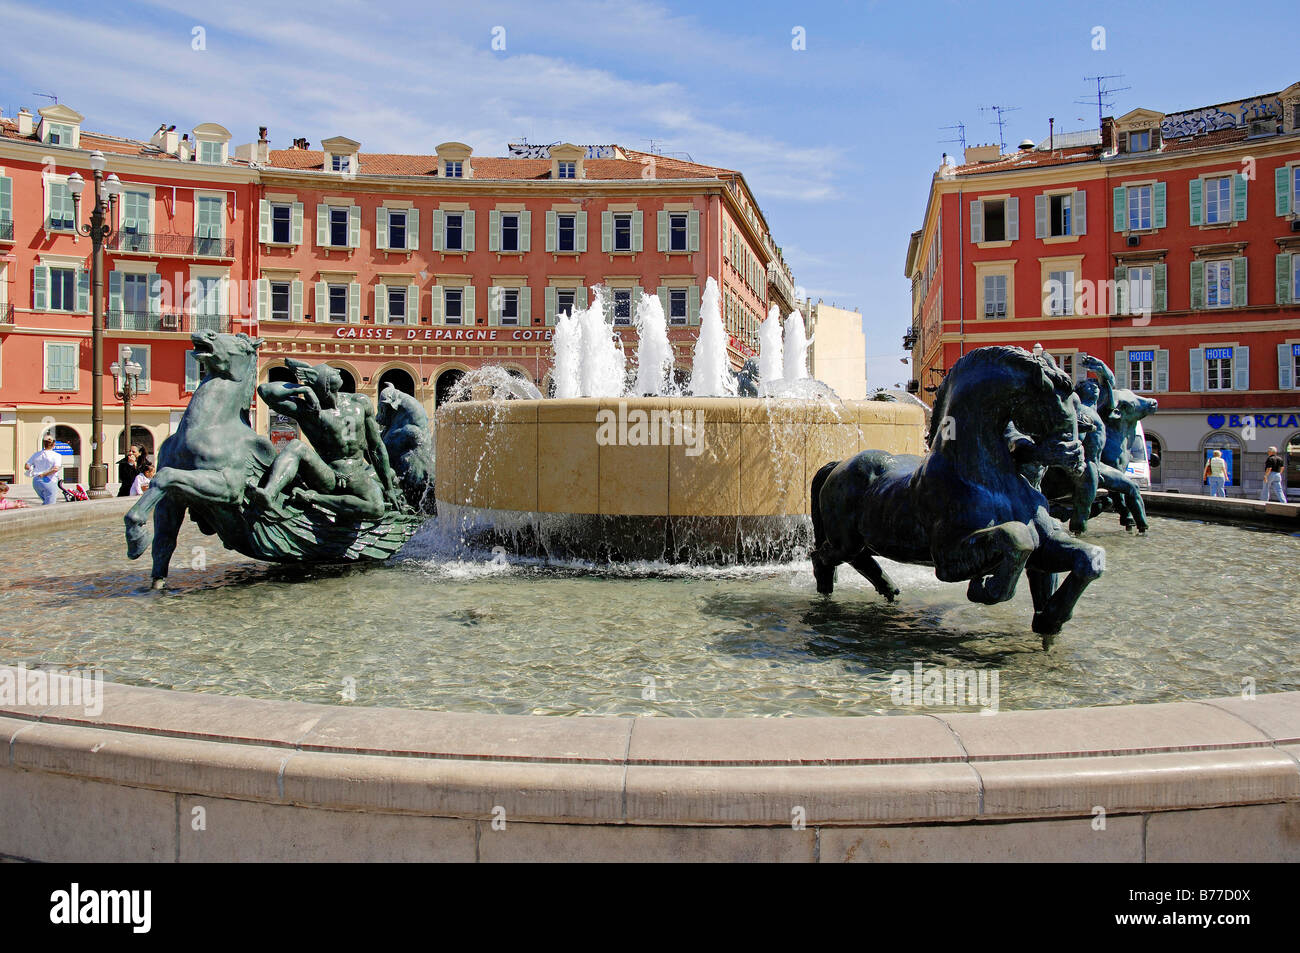 Fountain at Place Massena, Nice, Alpes-Maritimes, Provence-Alpes-Cote d'Azur, Southern France, France, Europe Stock Photo